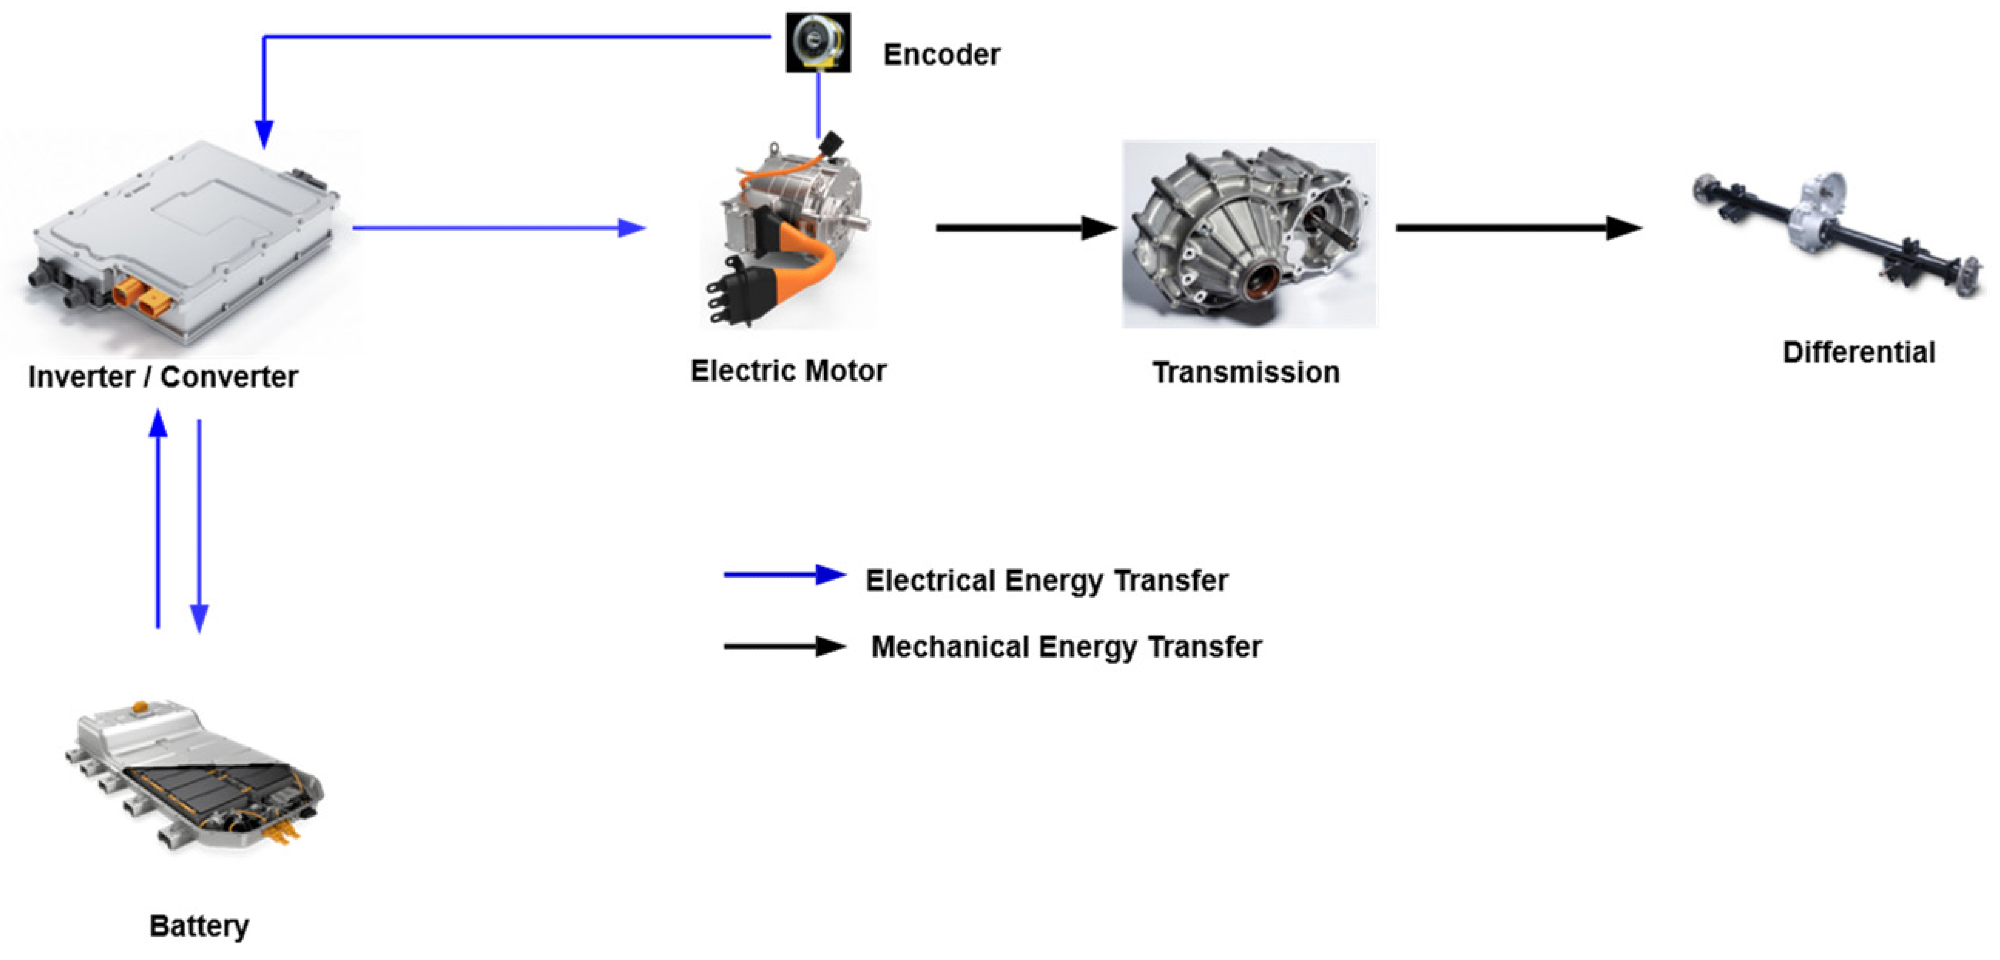 Electrical Vehicle (EV) drive system components